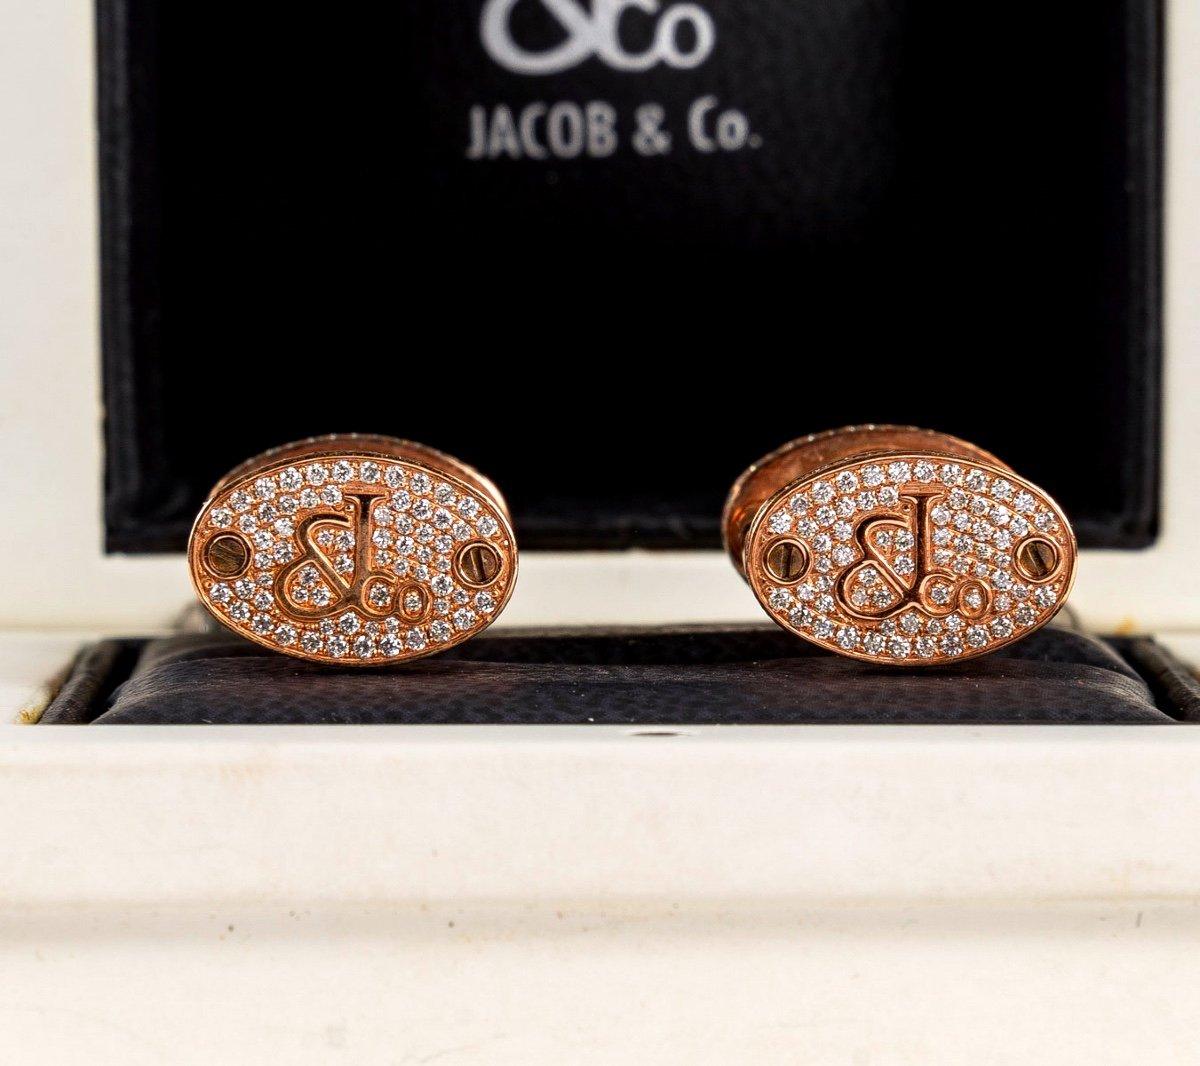 Sumptuous pair of cufflinks from the house of Jacob & Co.

These 18-carat rose gold, hourglass-shaped cufflinks are adorned with 568 brilliant-cut diamonds with a total value of 2.00 carats, to which are added 1 .00 carat of floating